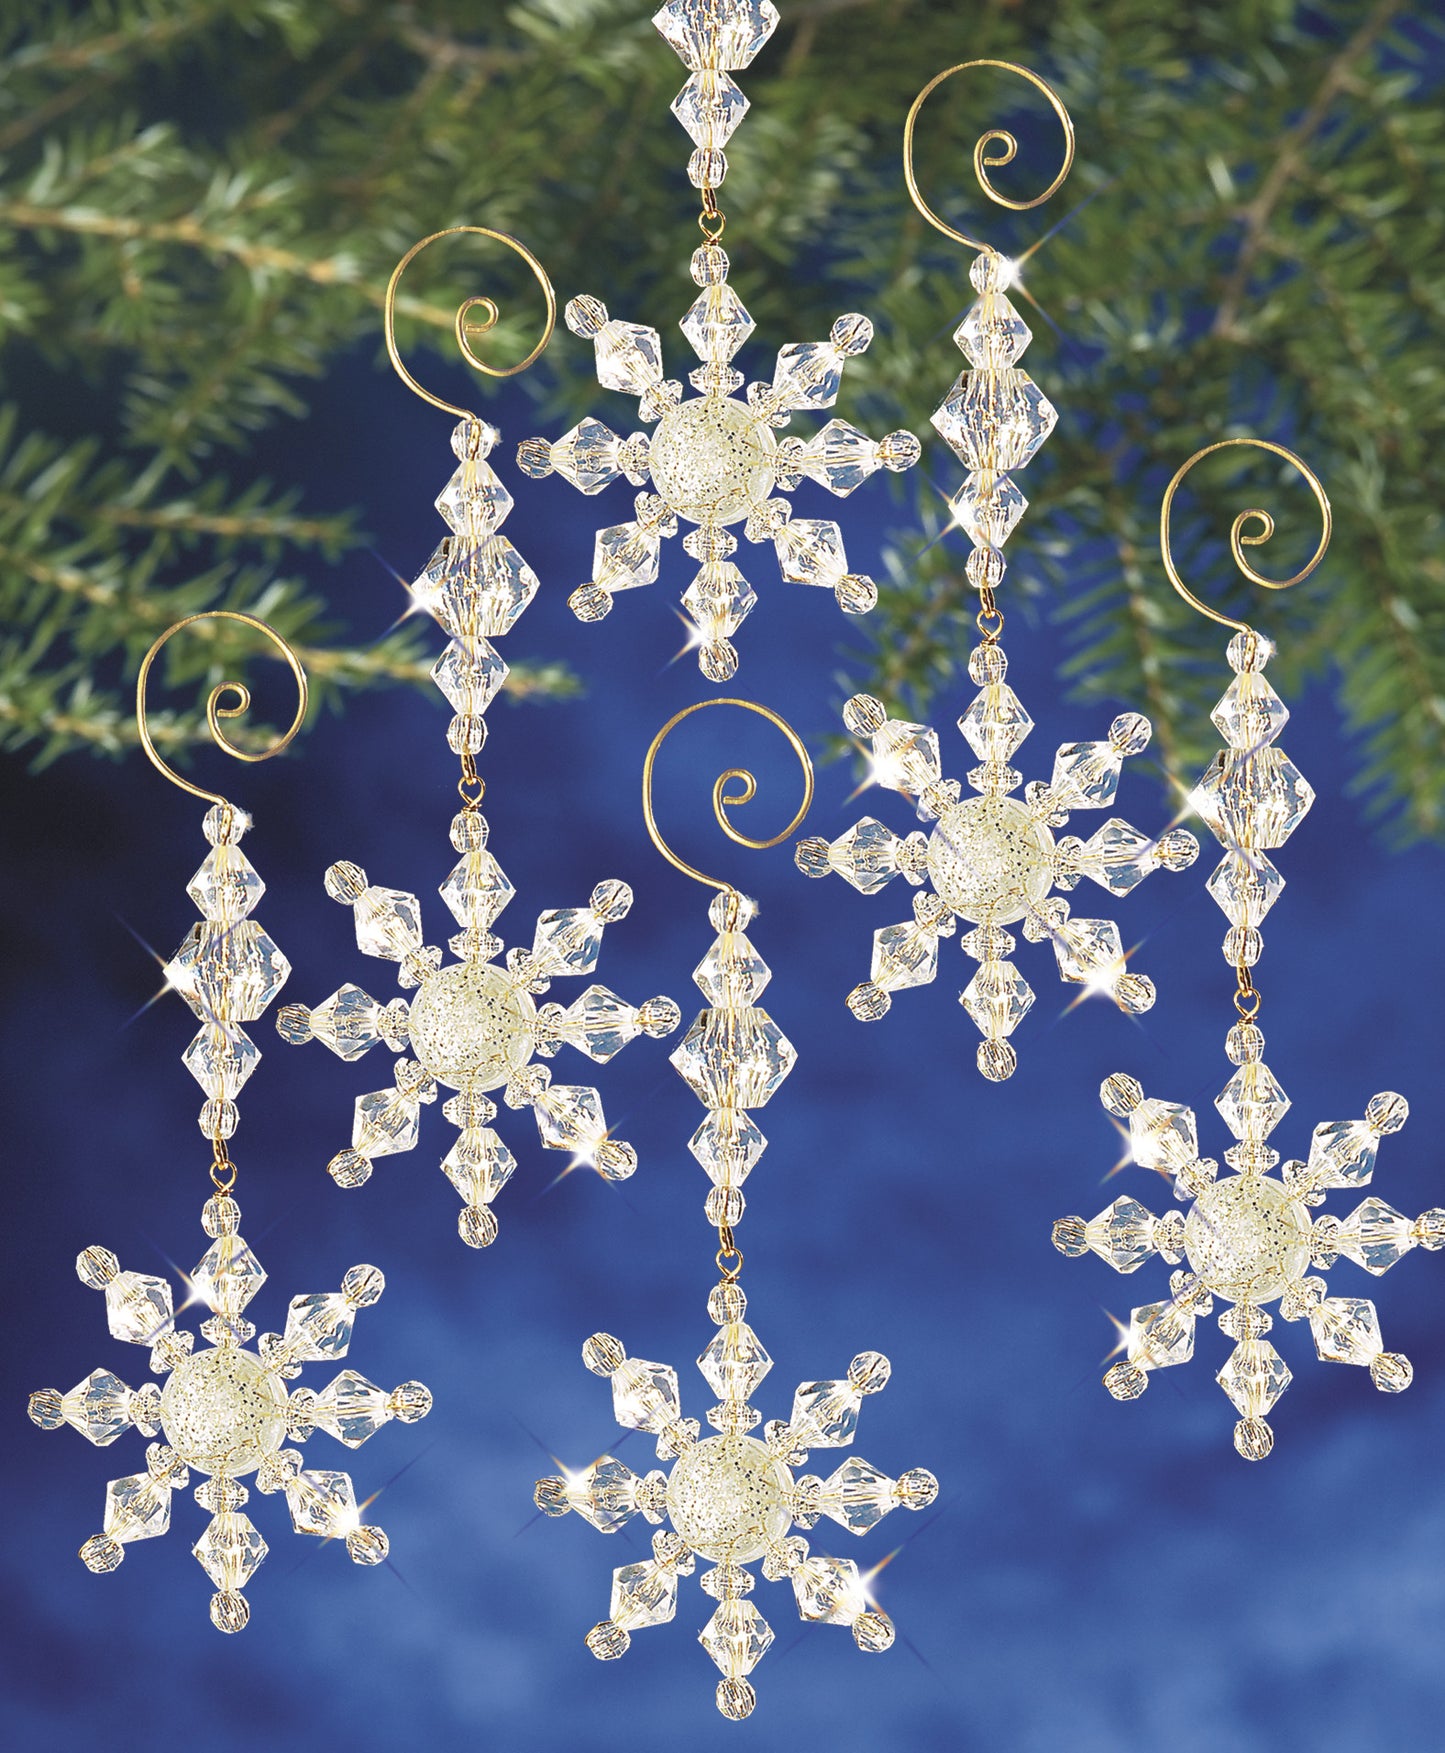 Beadery Holiday Ornament Kit Snow Crystal Dangler #7332 - Beadery Products